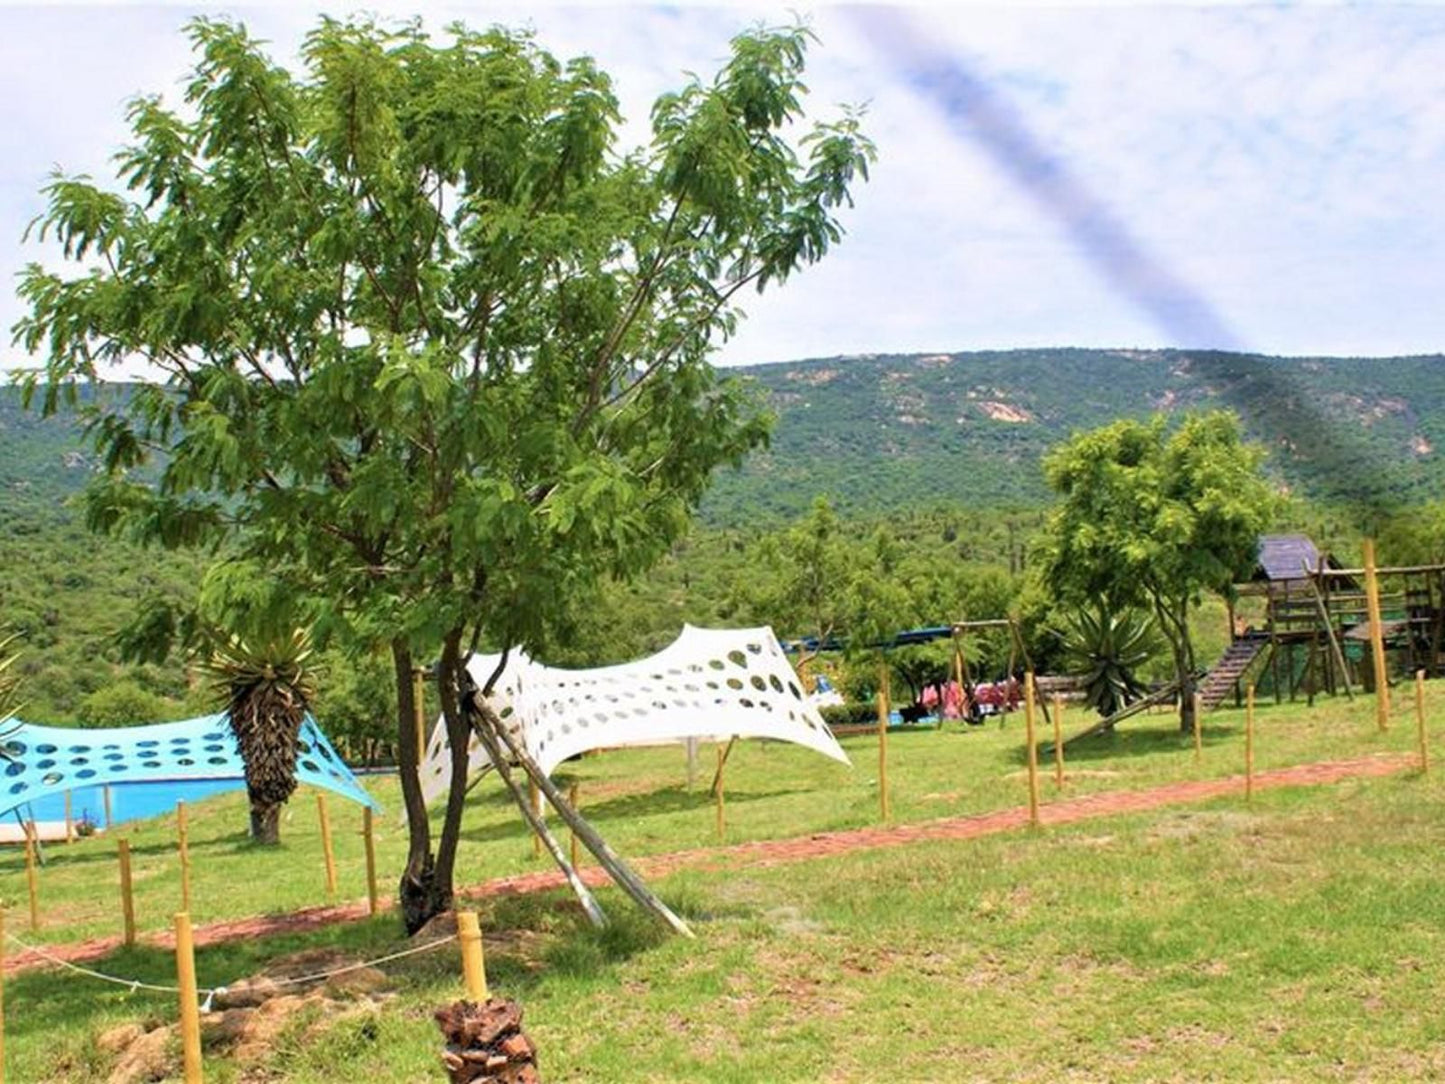 Tshinakie Family Resort Makgeng Haenertsburg Limpopo Province South Africa Complementary Colors, Tree, Plant, Nature, Wood